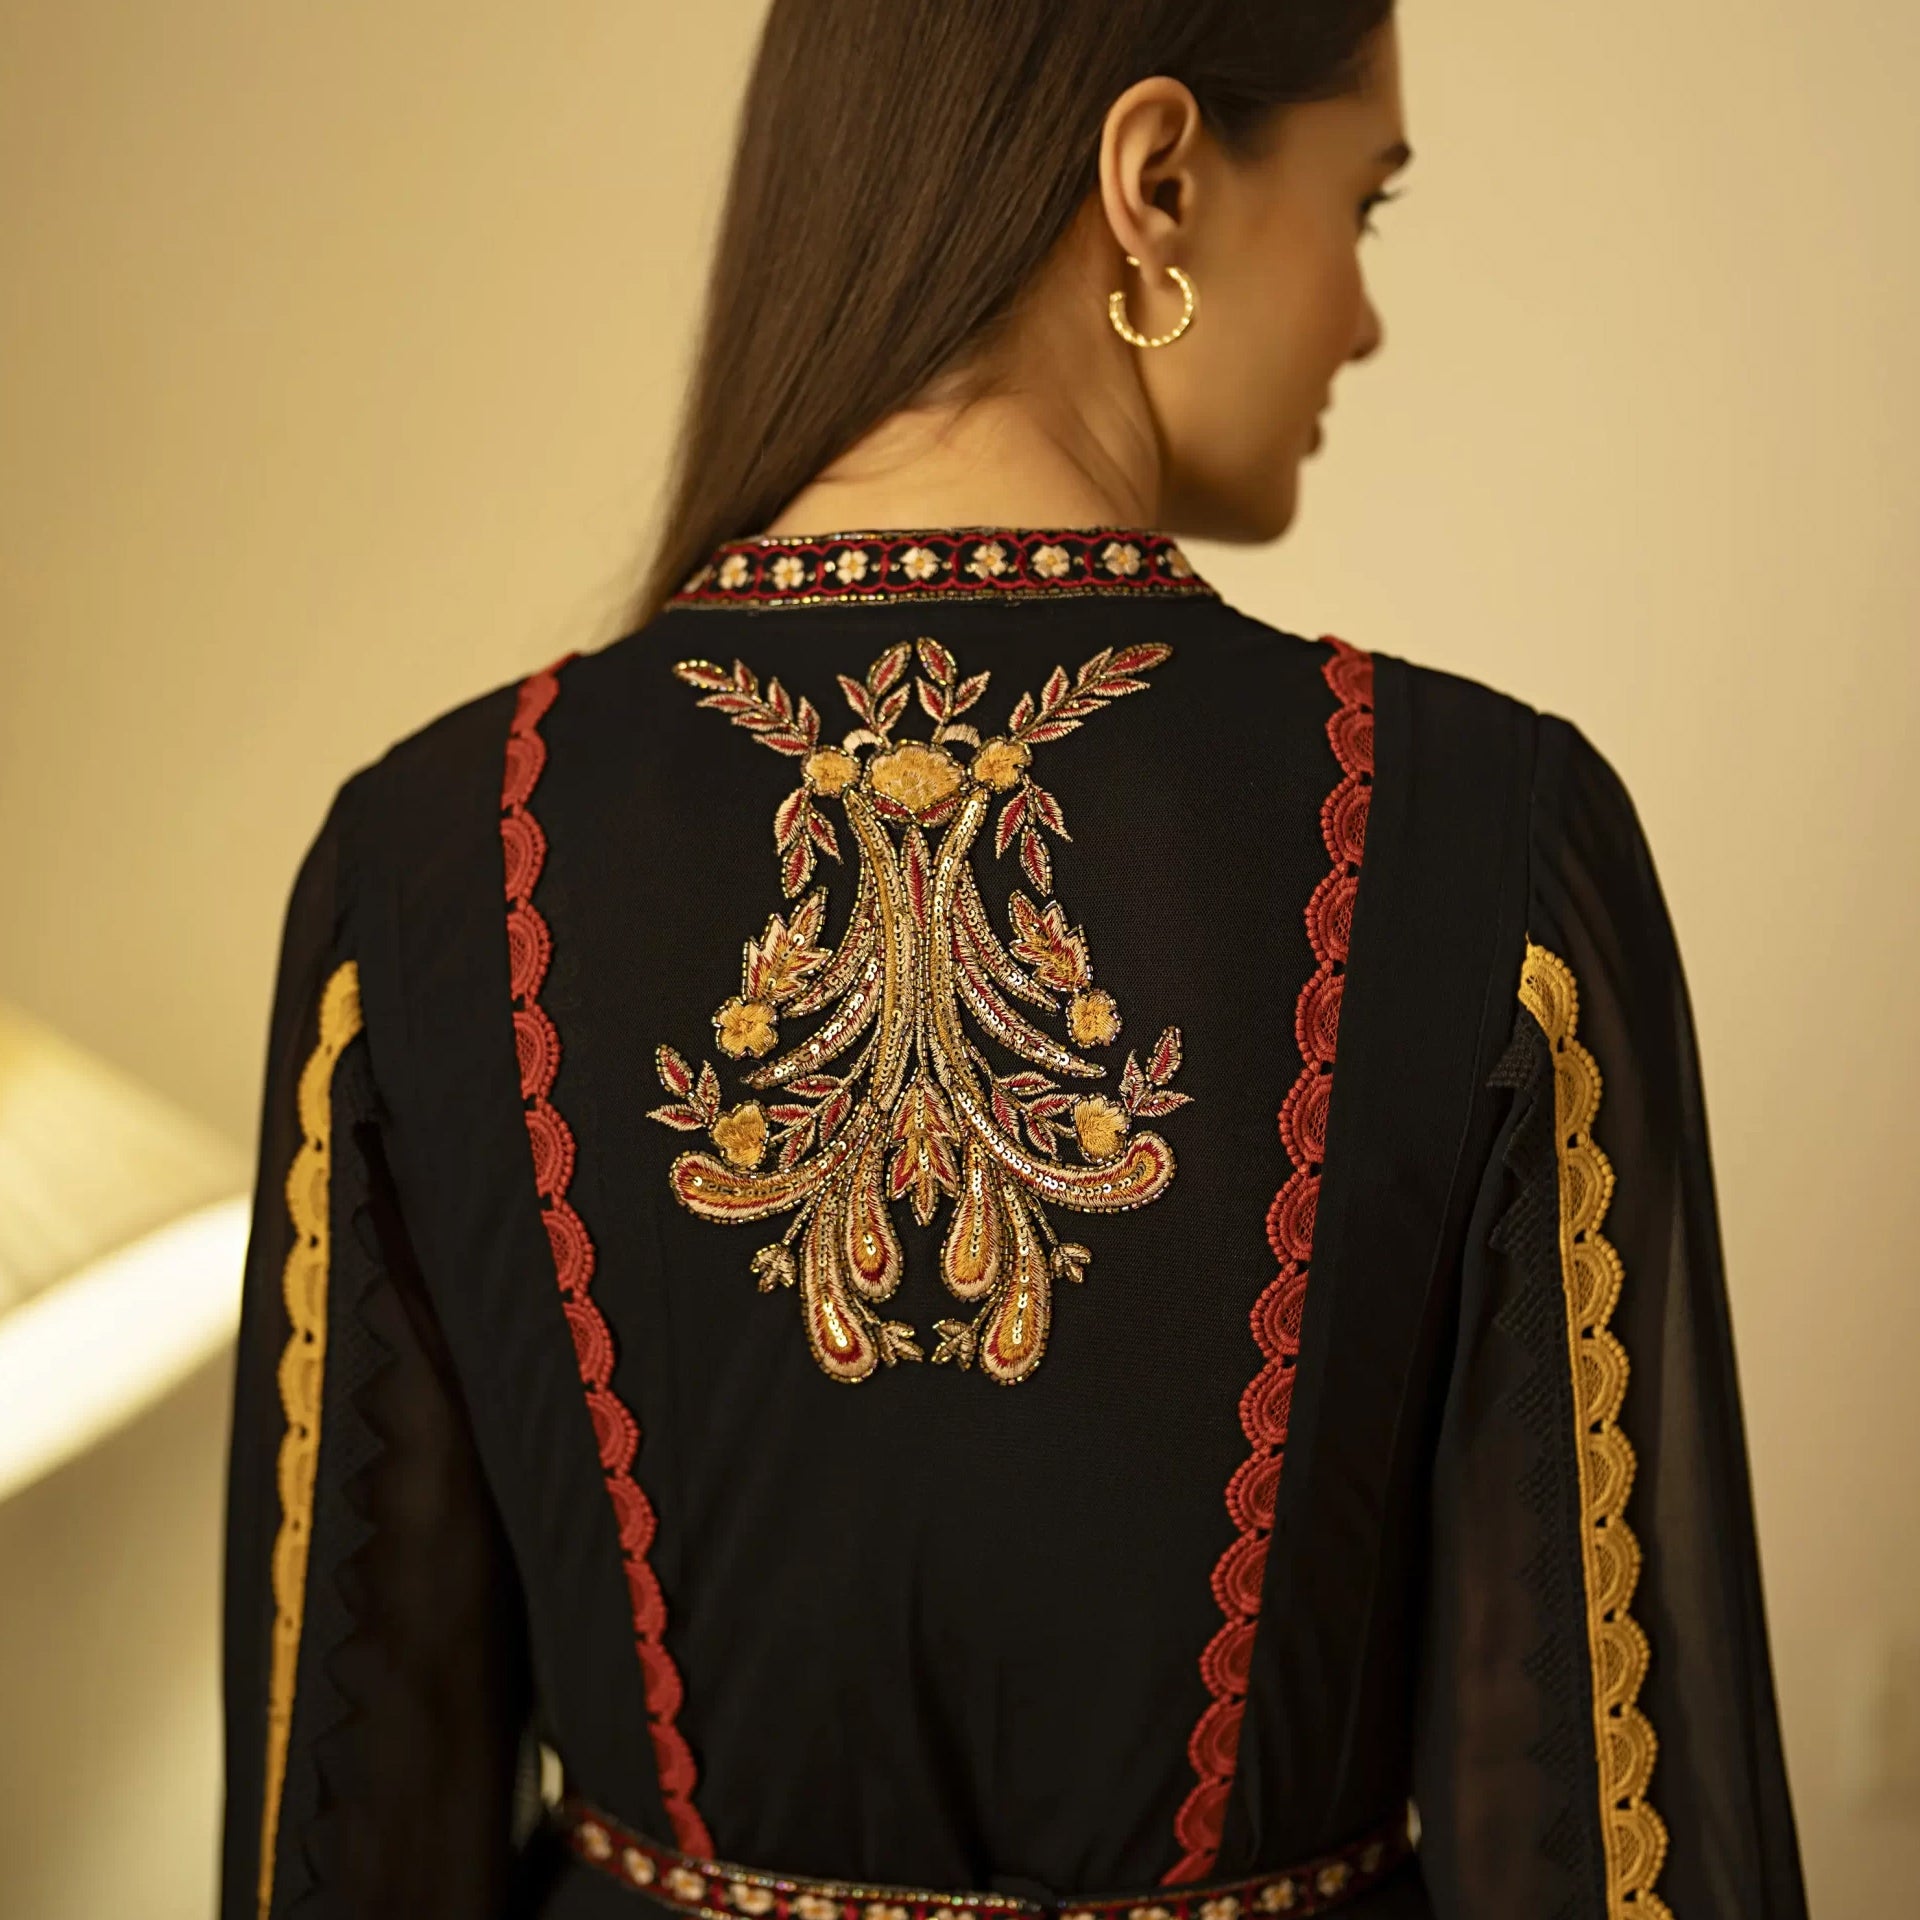 Black Embroidery Eozal Dress with Long Sleeves And Mixed Material From Shalky